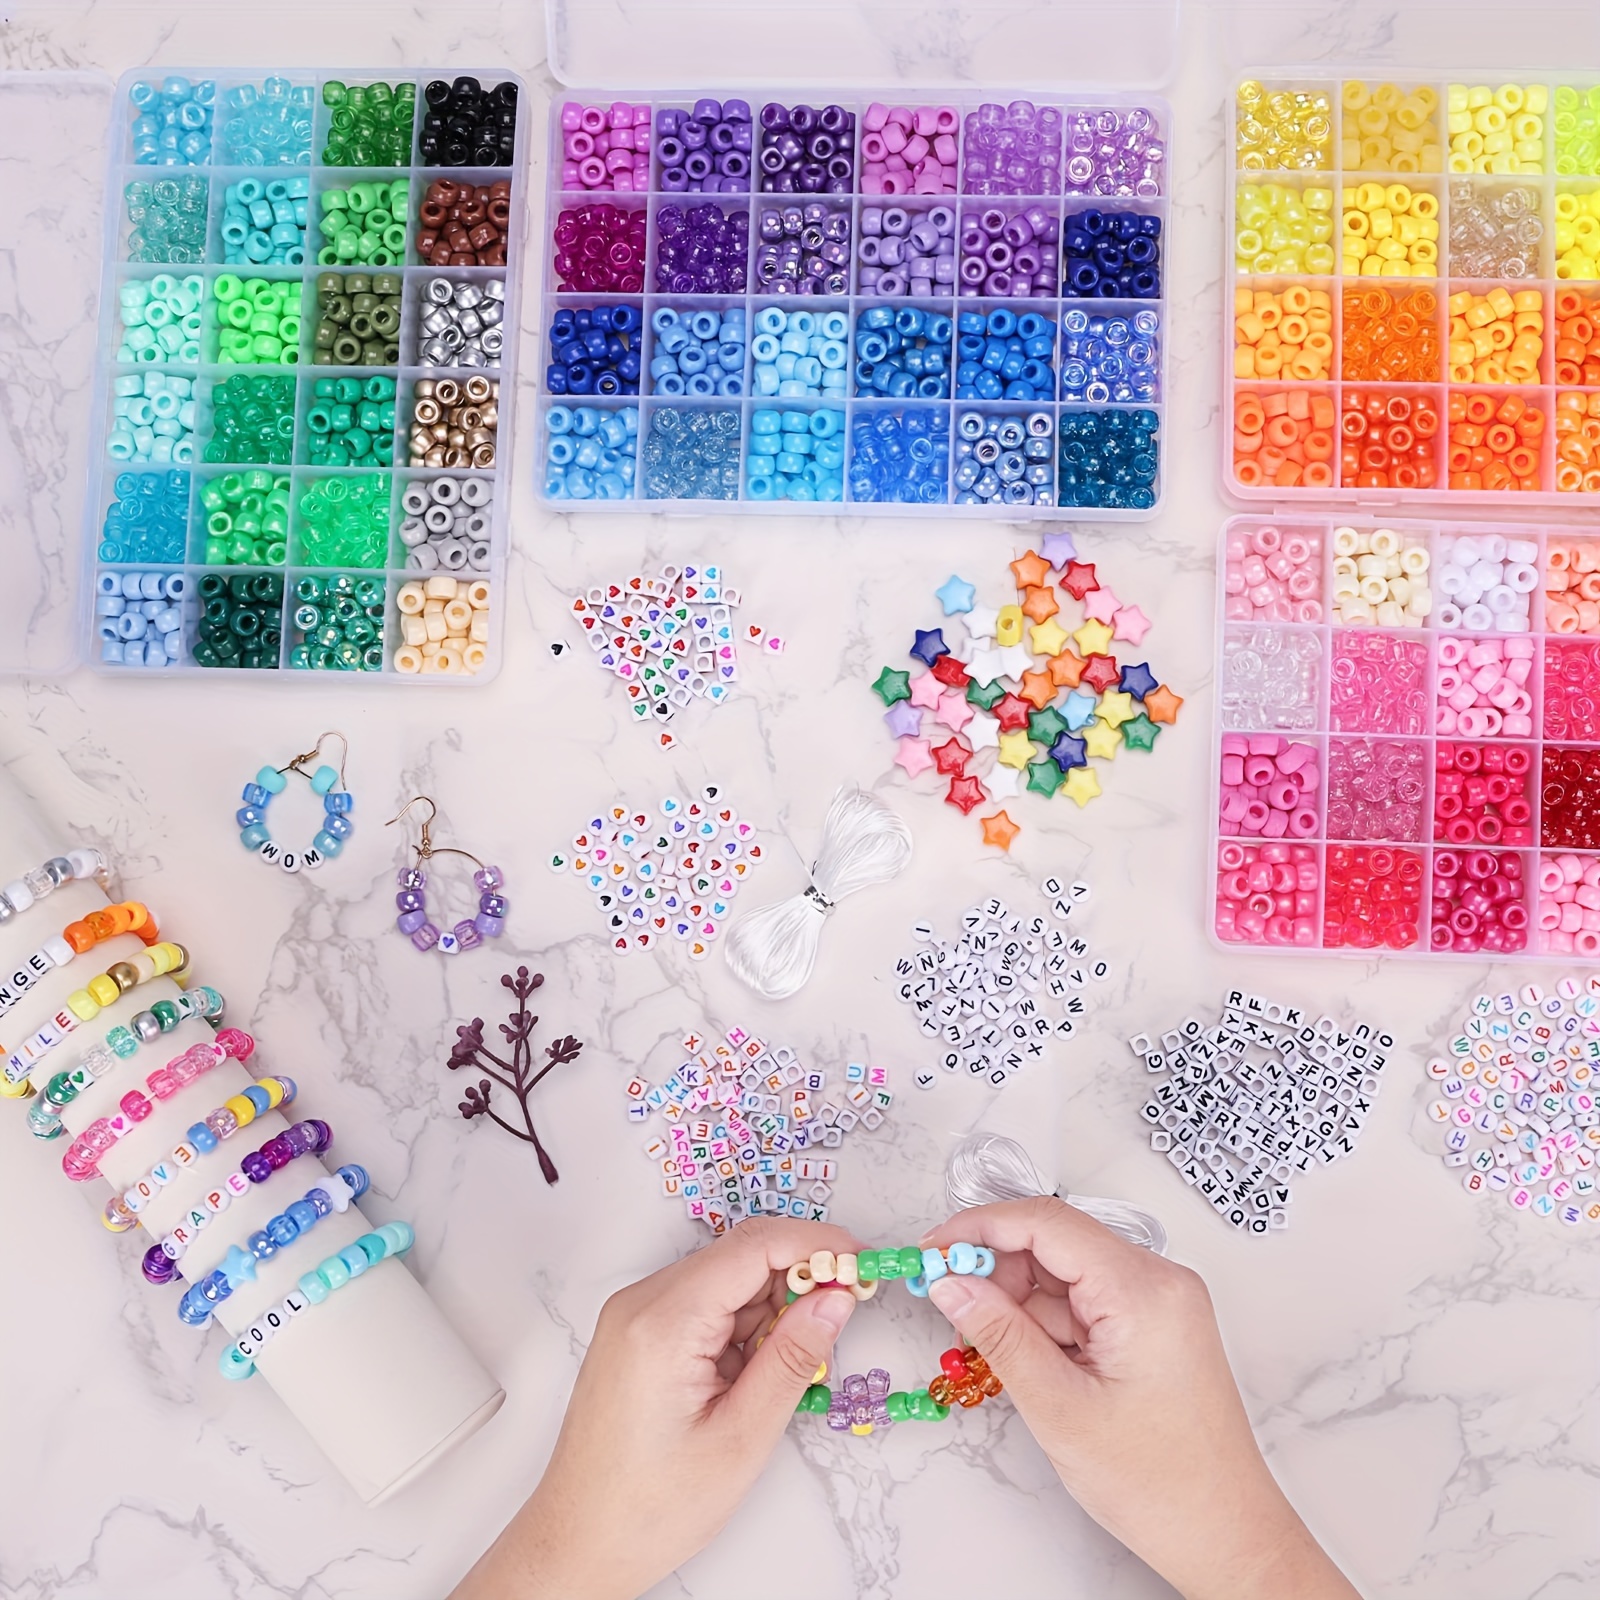 

3250pcs Beads Set, Friendship Bracelet Kit 2400pcs Rainbow Beads In 96 Colors, 800pcs Letter And Heart Beads With 20 Meter Elastic Threads For Jewelry Necklace Making